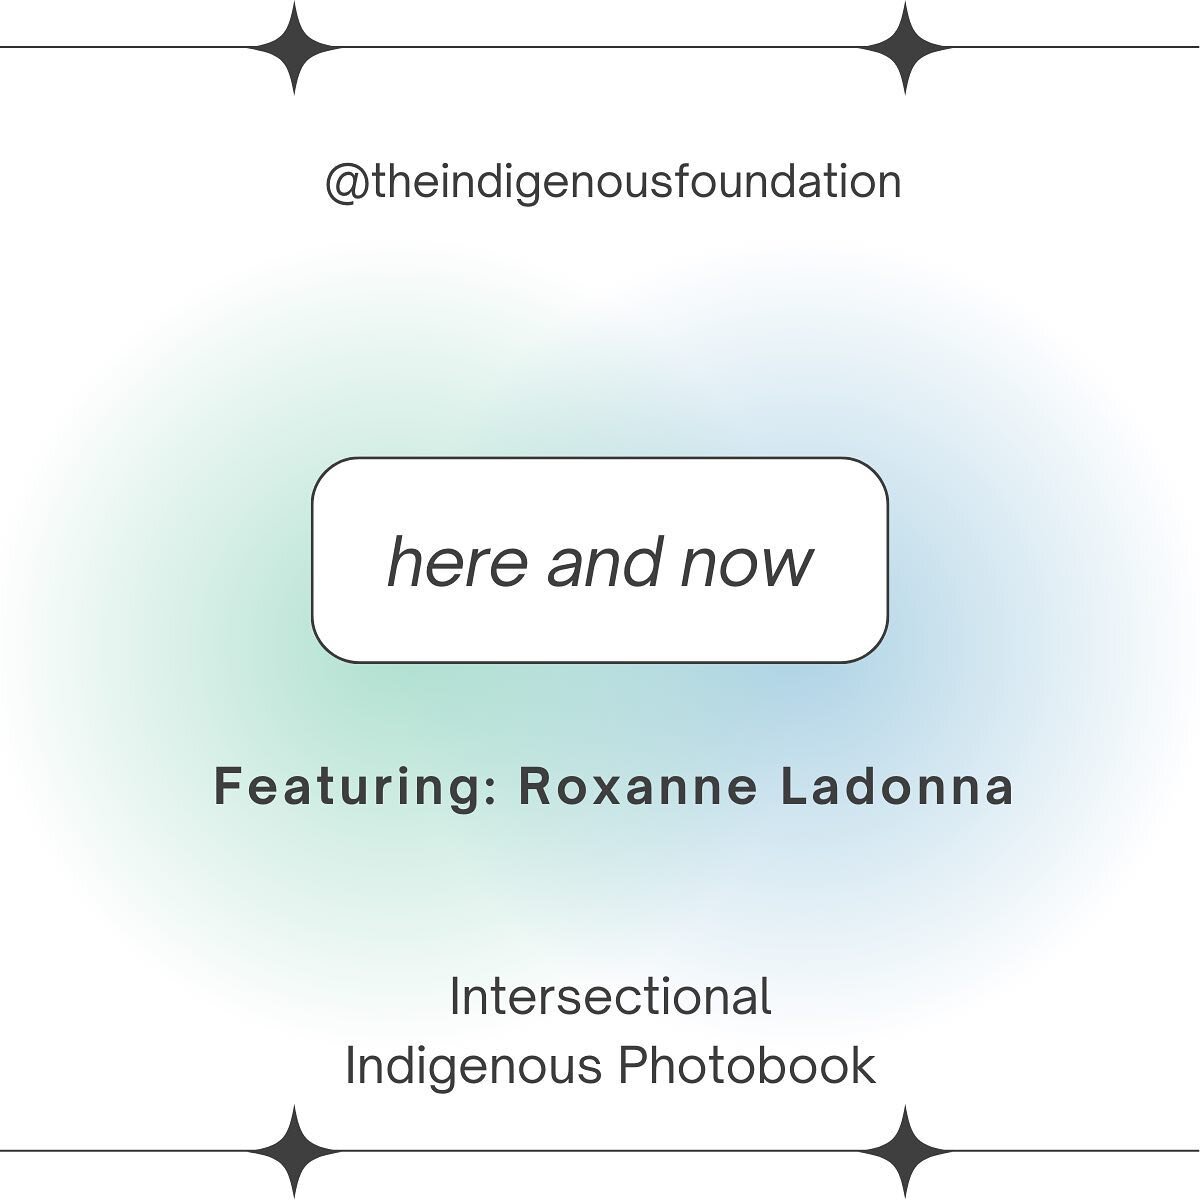 We are so excited to share our second photobook submission as part of our very first photobook project, featuring Roxanne Ladonna (@roxanne__ladonna). 

Led by Madison Crist and Alexandra Mandewo (@alexandramandewo